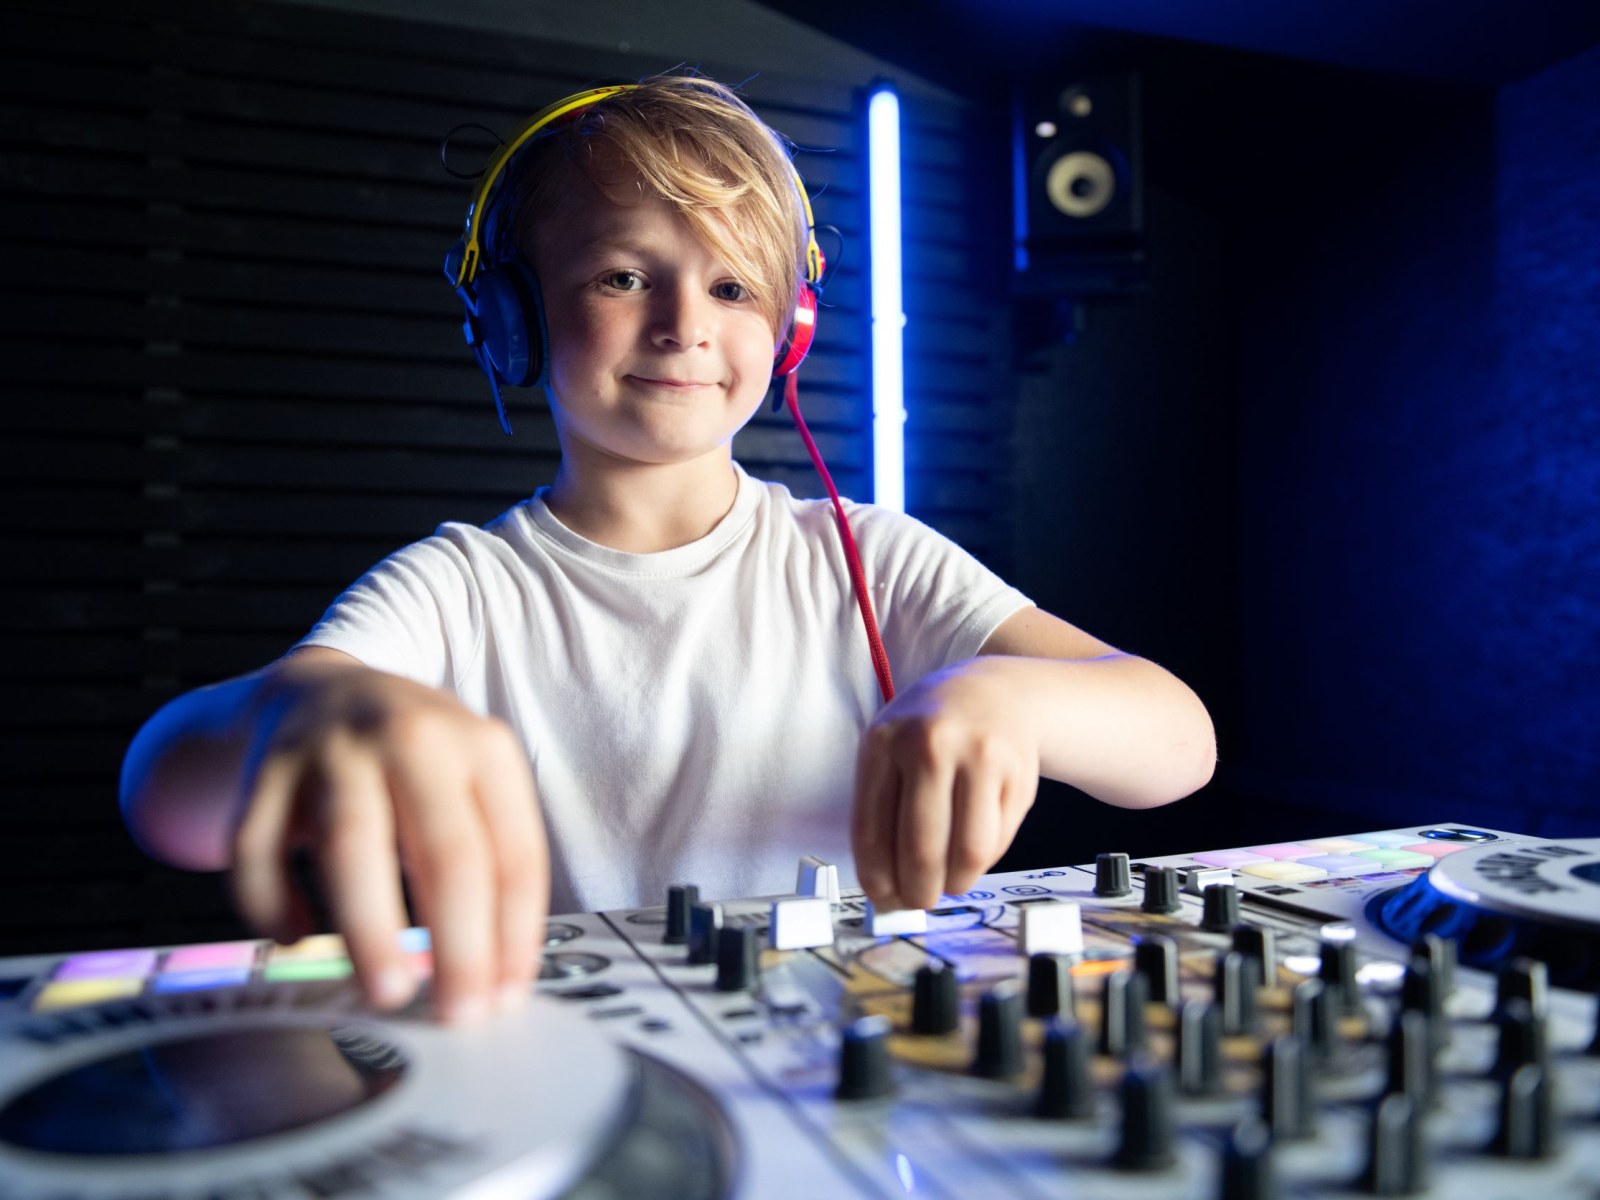 Who Is The Youngest DJ